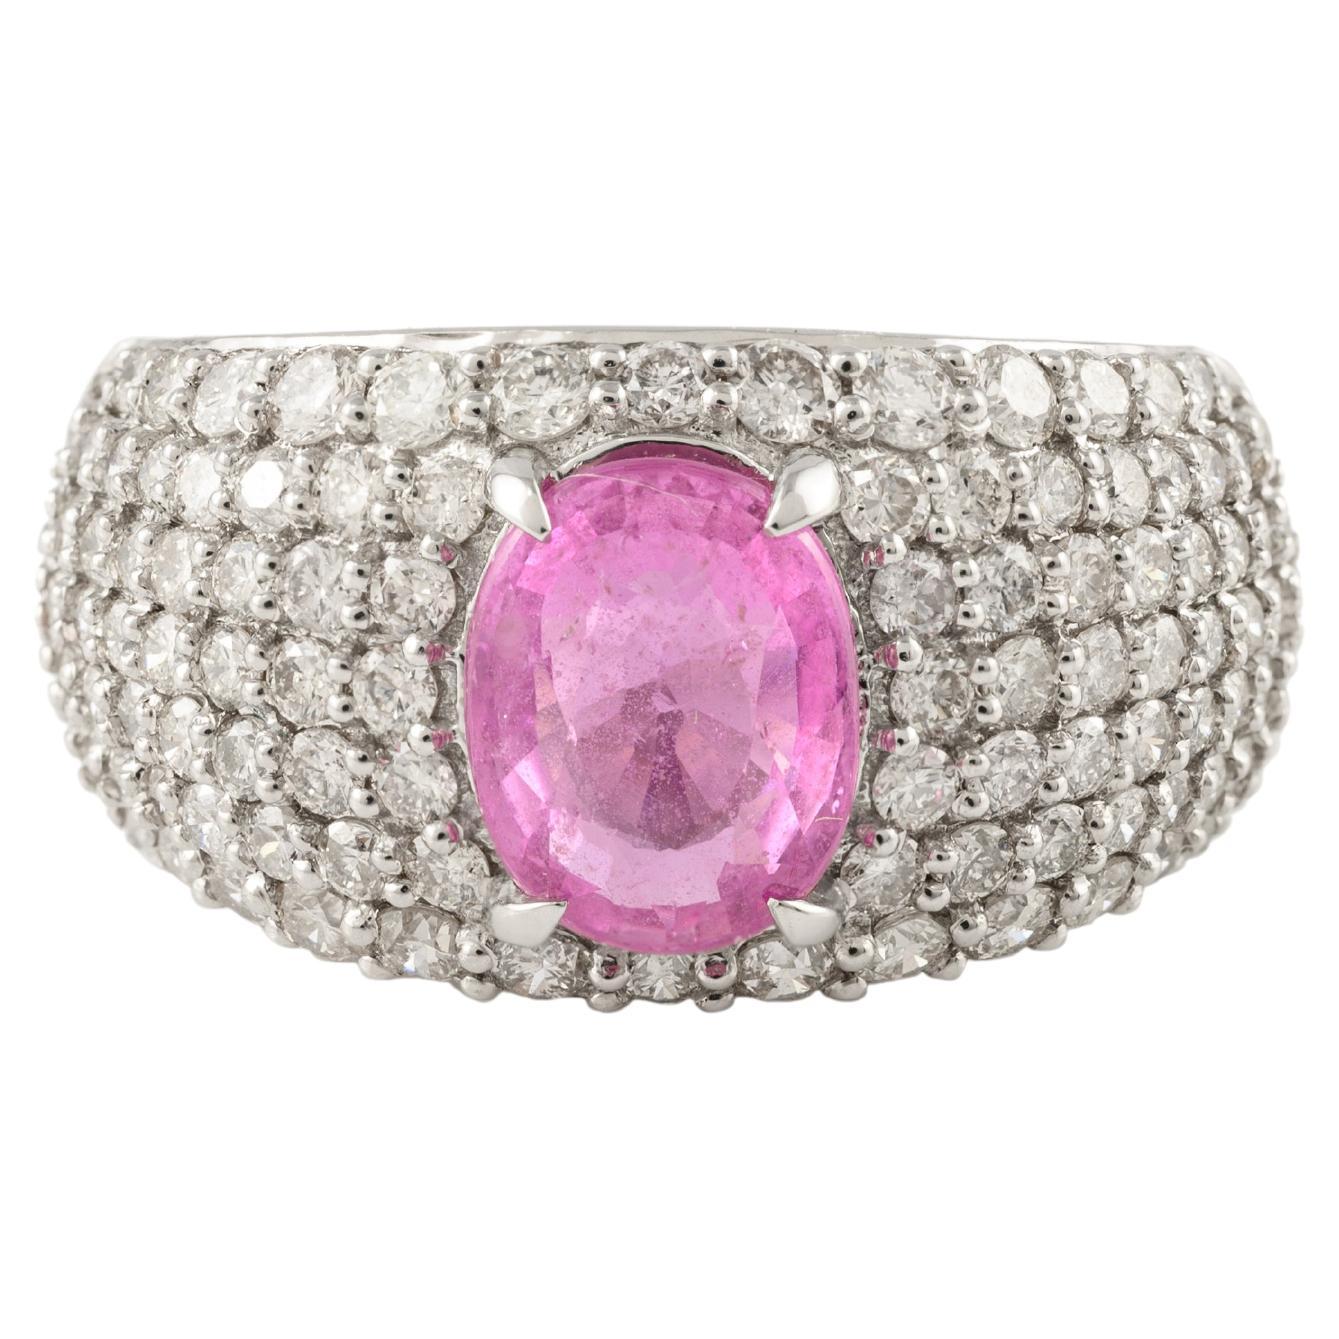 Oval Pink Sapphire Diamond Cocktail Dome Ring in 18k Solid White Gold